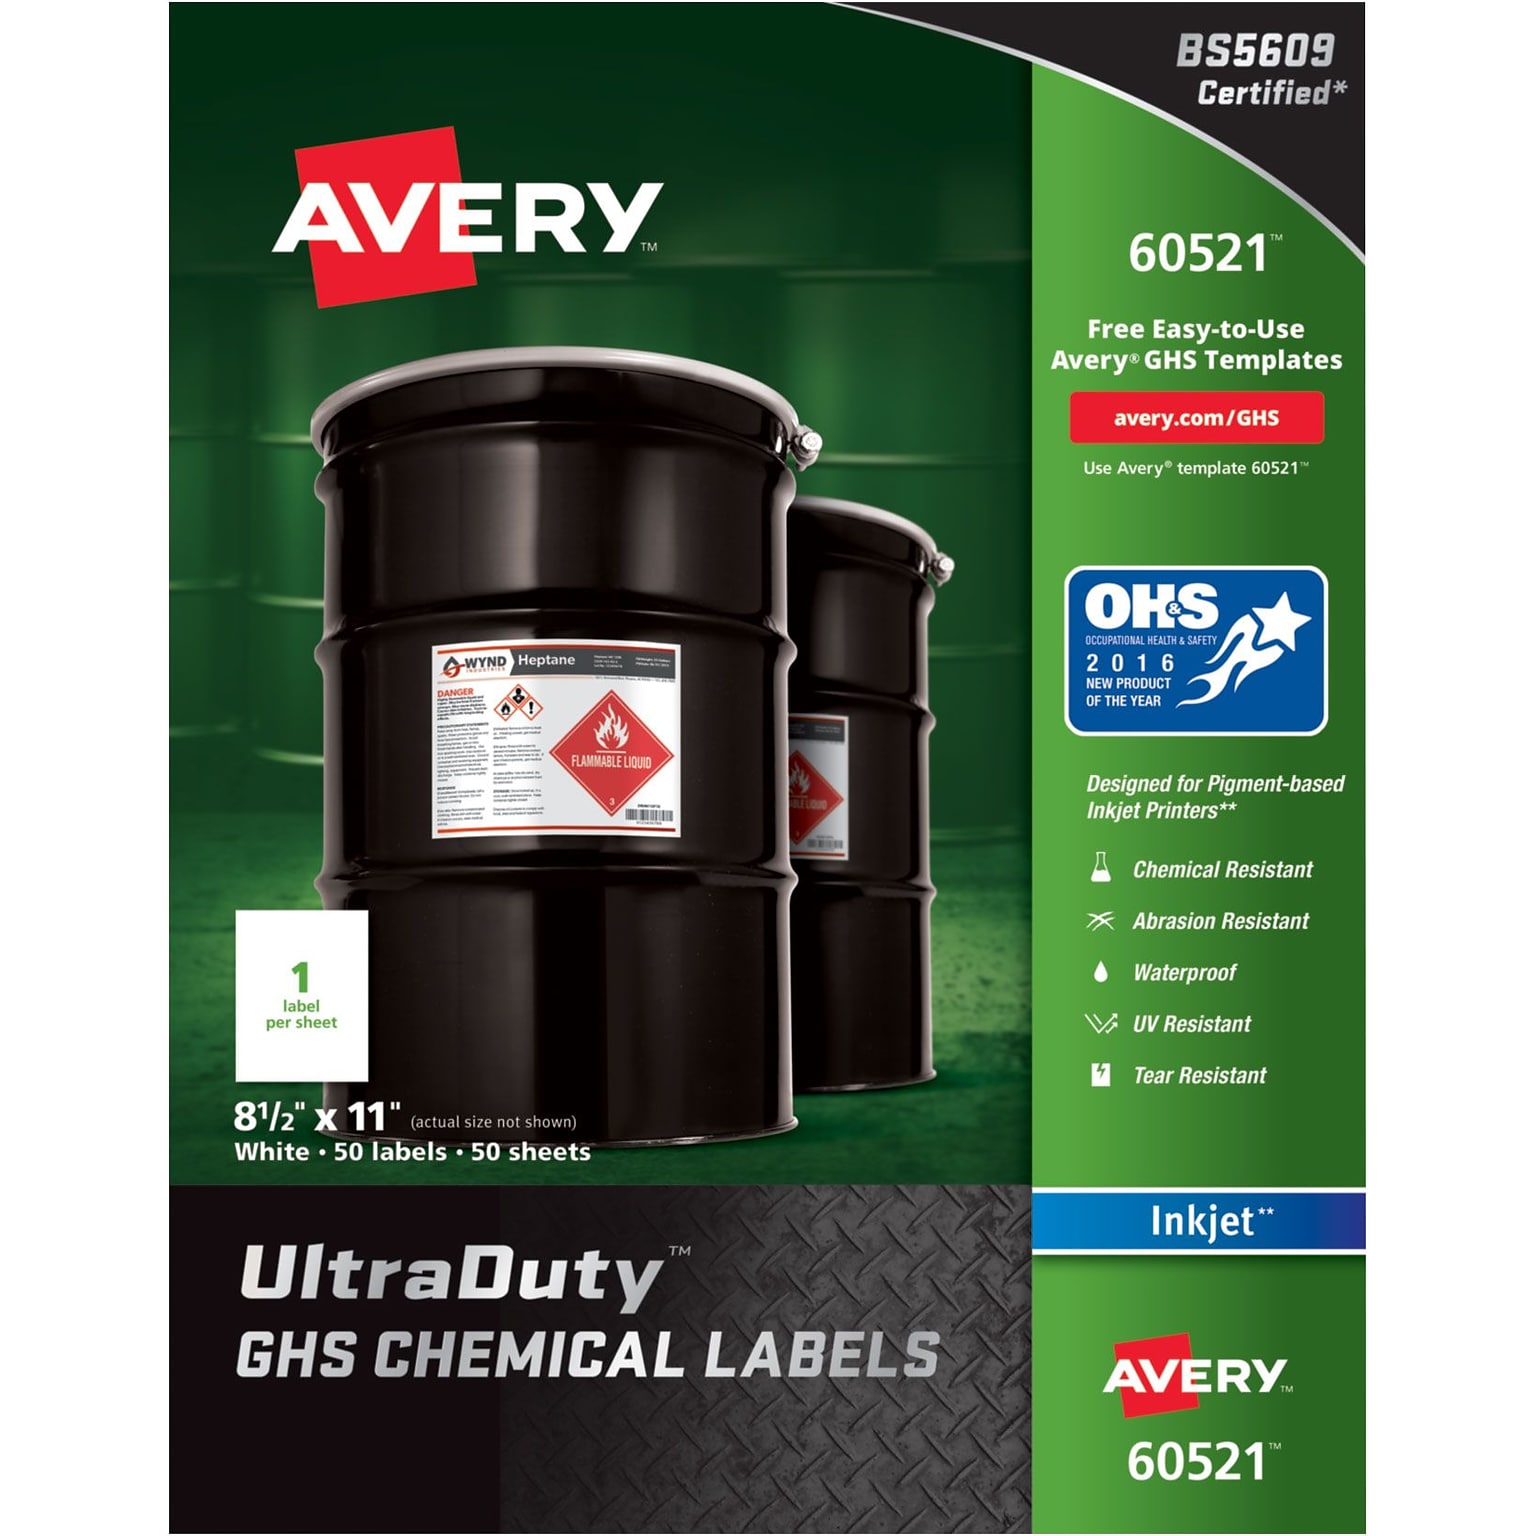 Avery UltraDuty GHS Chemical Labels for Pigment-Based Inkjet Printers, Waterproof, UV Resistant, 8-1/2 x 11, Box of 50 (60521)